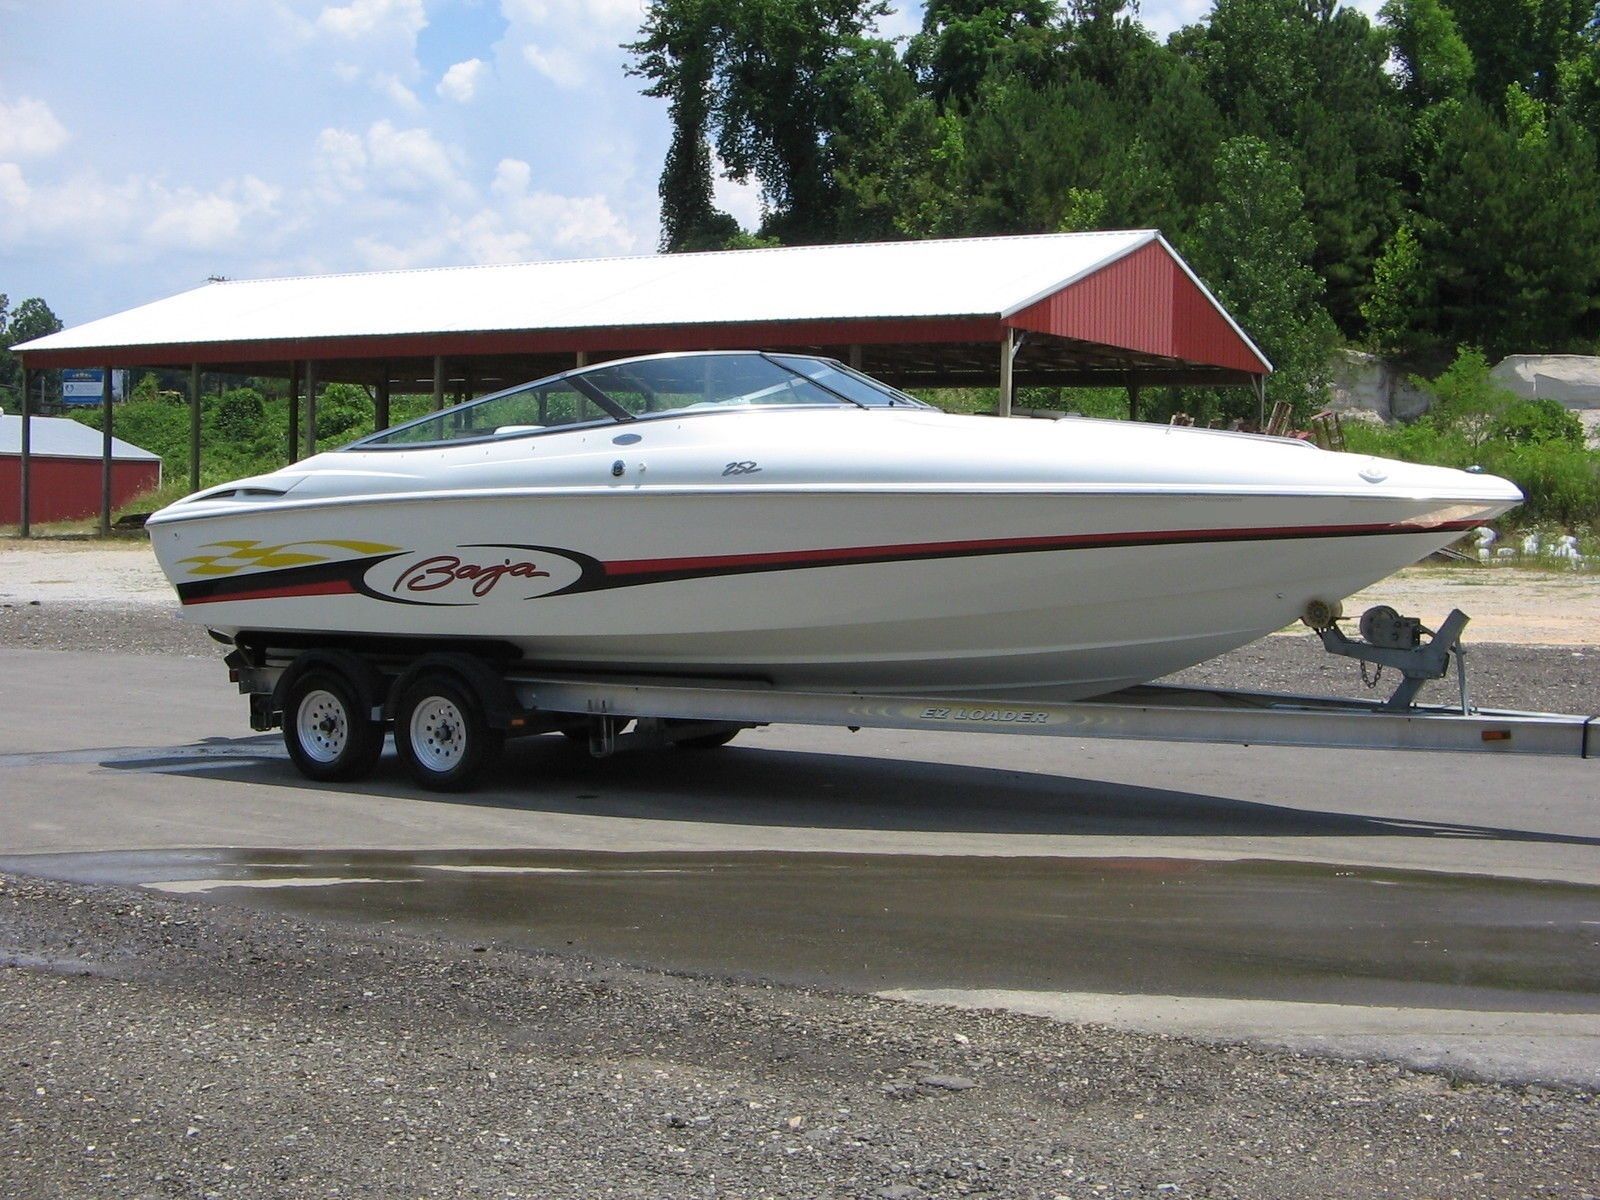 baja-252-1998-for-sale-for-24-000-boats-from-usa